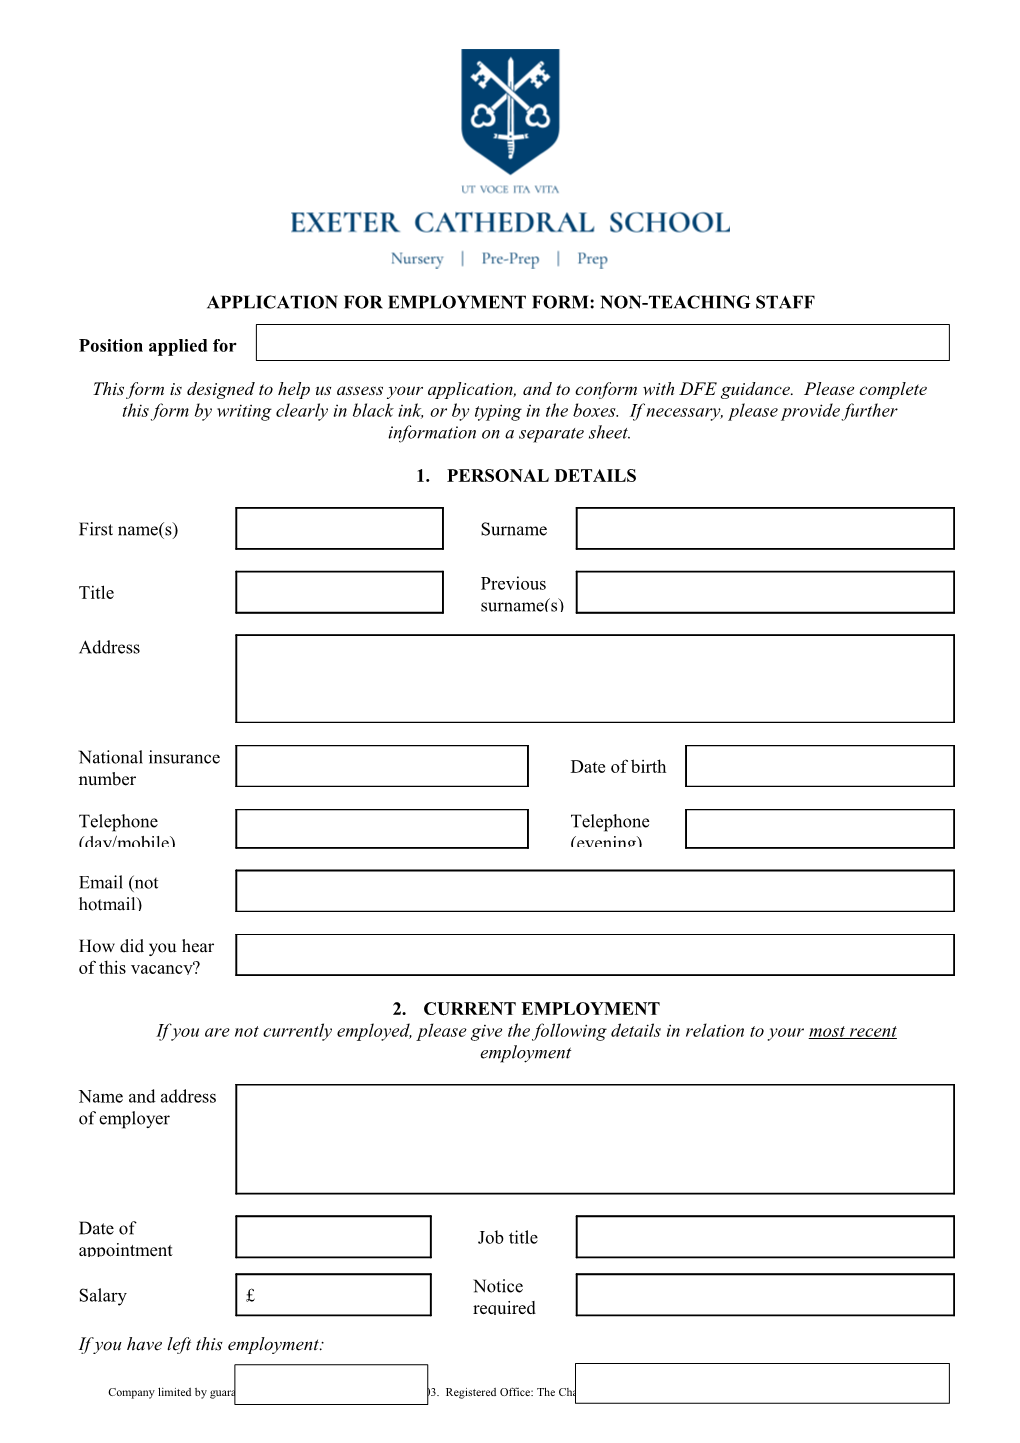 Exeter Catherdal School - Application Form